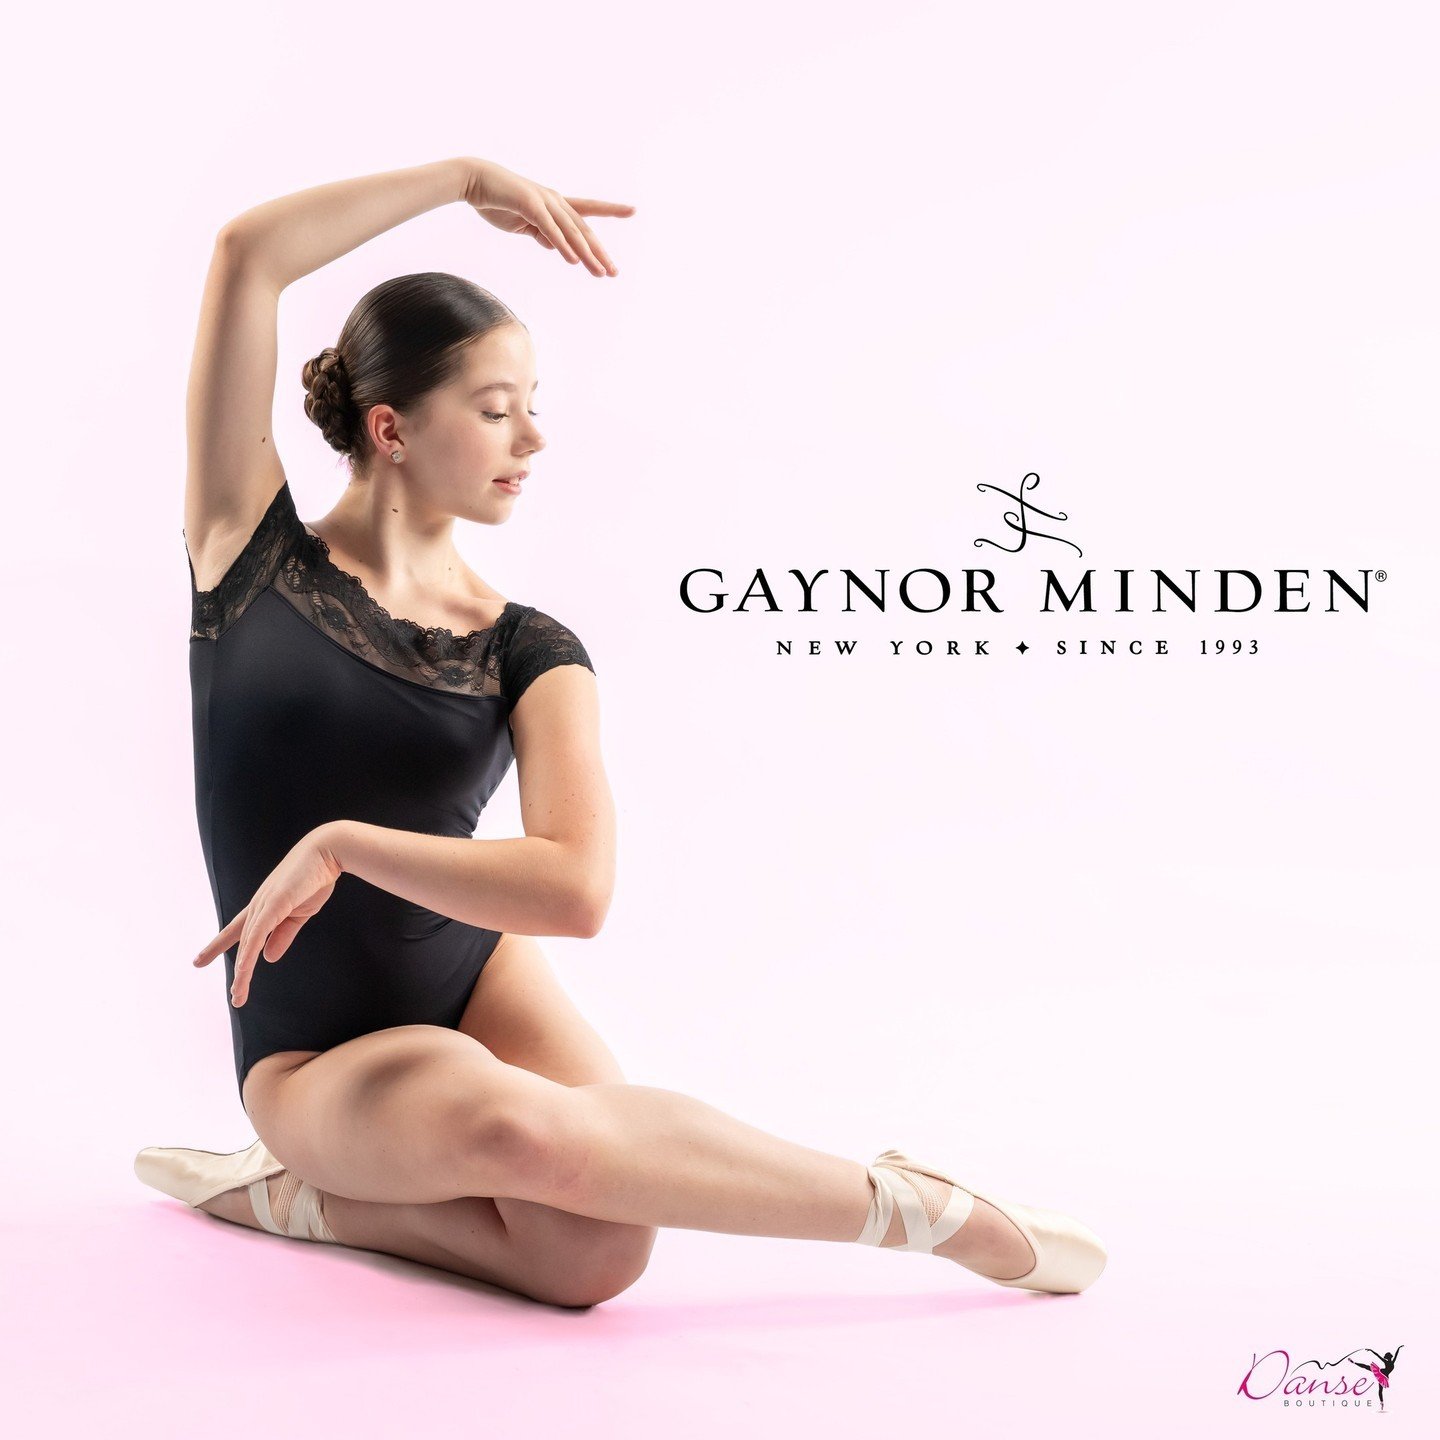 Shop the many wonderful @gaynorminden products with us! ⁠
Both the apparel and footwear are a must try on in store 😍⁠
⁠
📸 @yellowwood.photography⁠
#gaynorminden #dancewear #pointeshoes #ballet